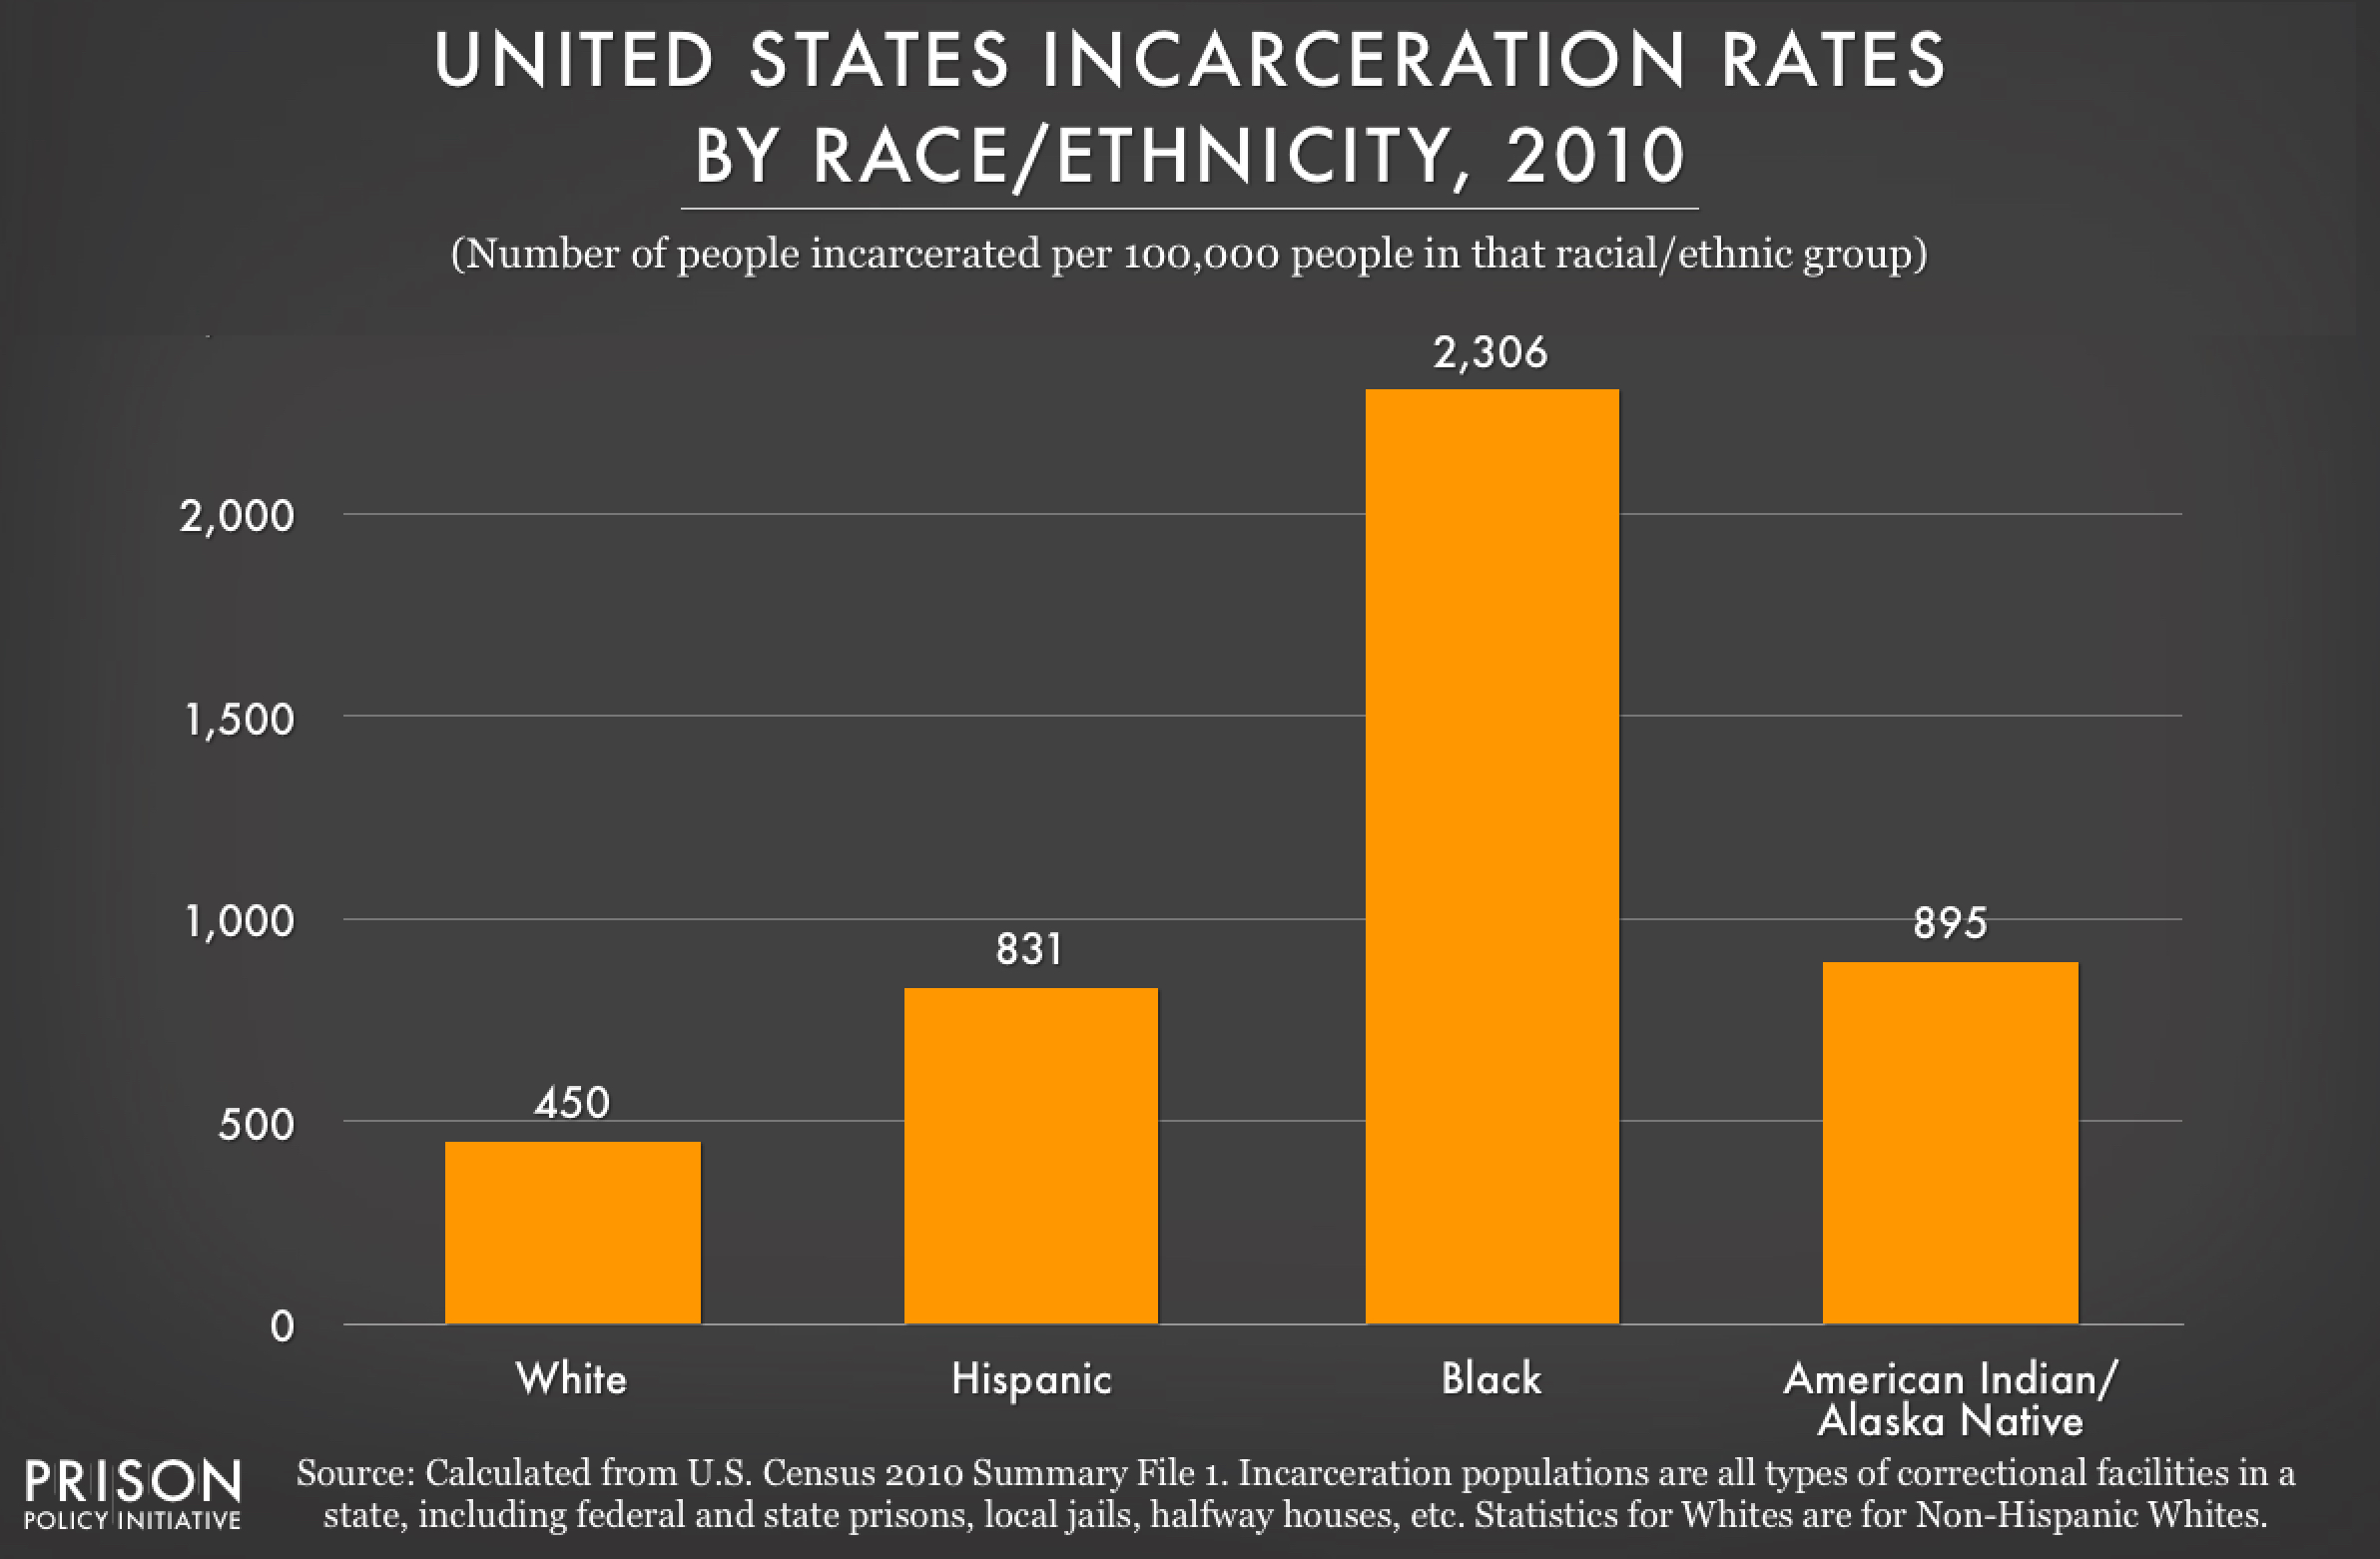 2010 graph showing incarceration rates per 100,000 people of various racial and ethnic groups in the United States